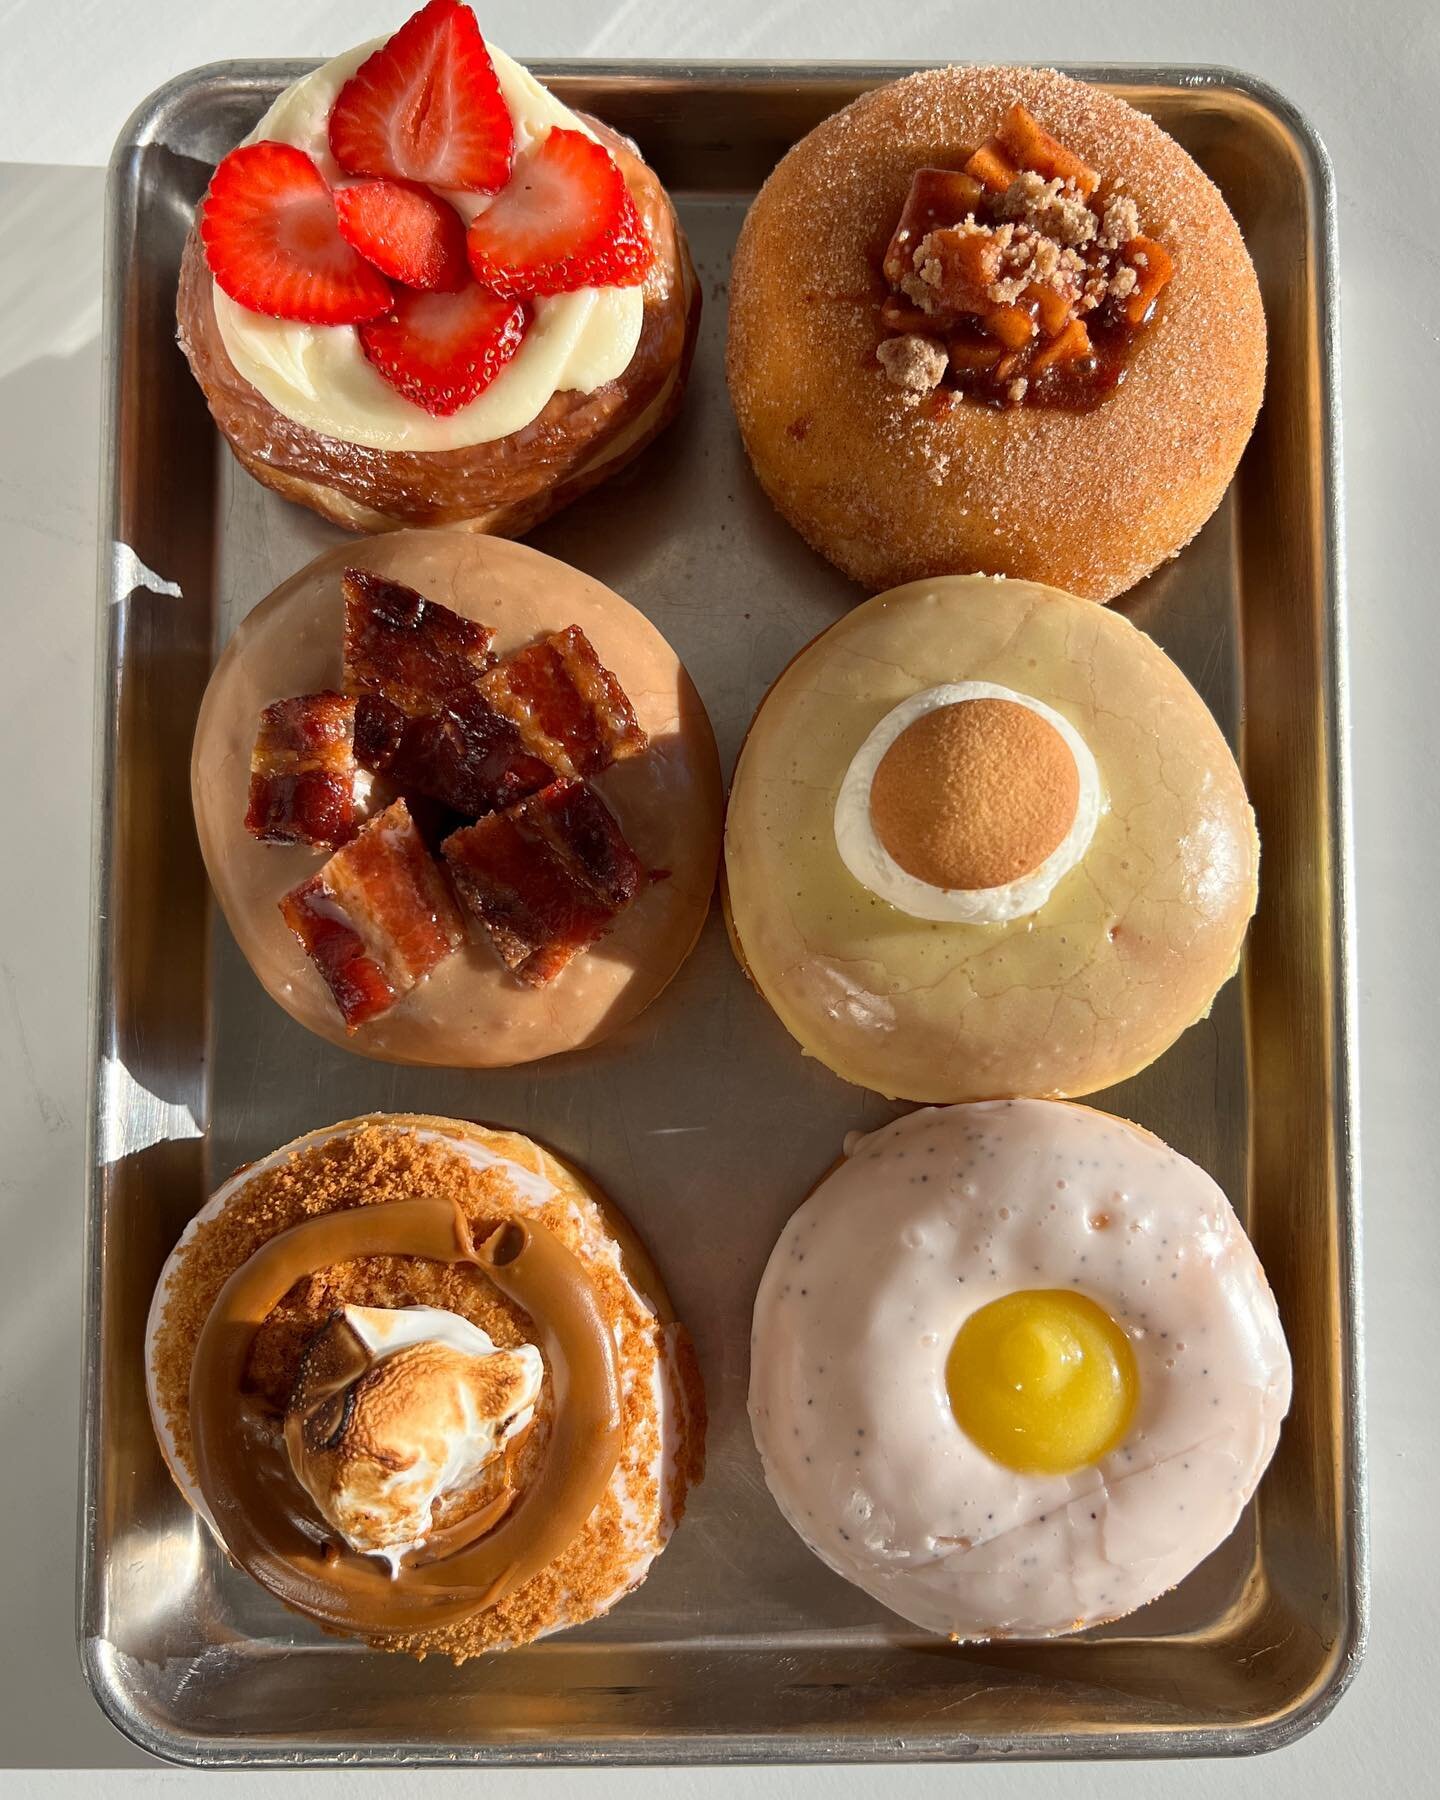 Happy September! We have several new donuts for the new month 🥳

* Strawberry Cronut
* Apple Pie
* Maple Bacon
* Banana Cream Pie
* Cookie Butter S&rsquo;mores
* Lemon Poppyseed